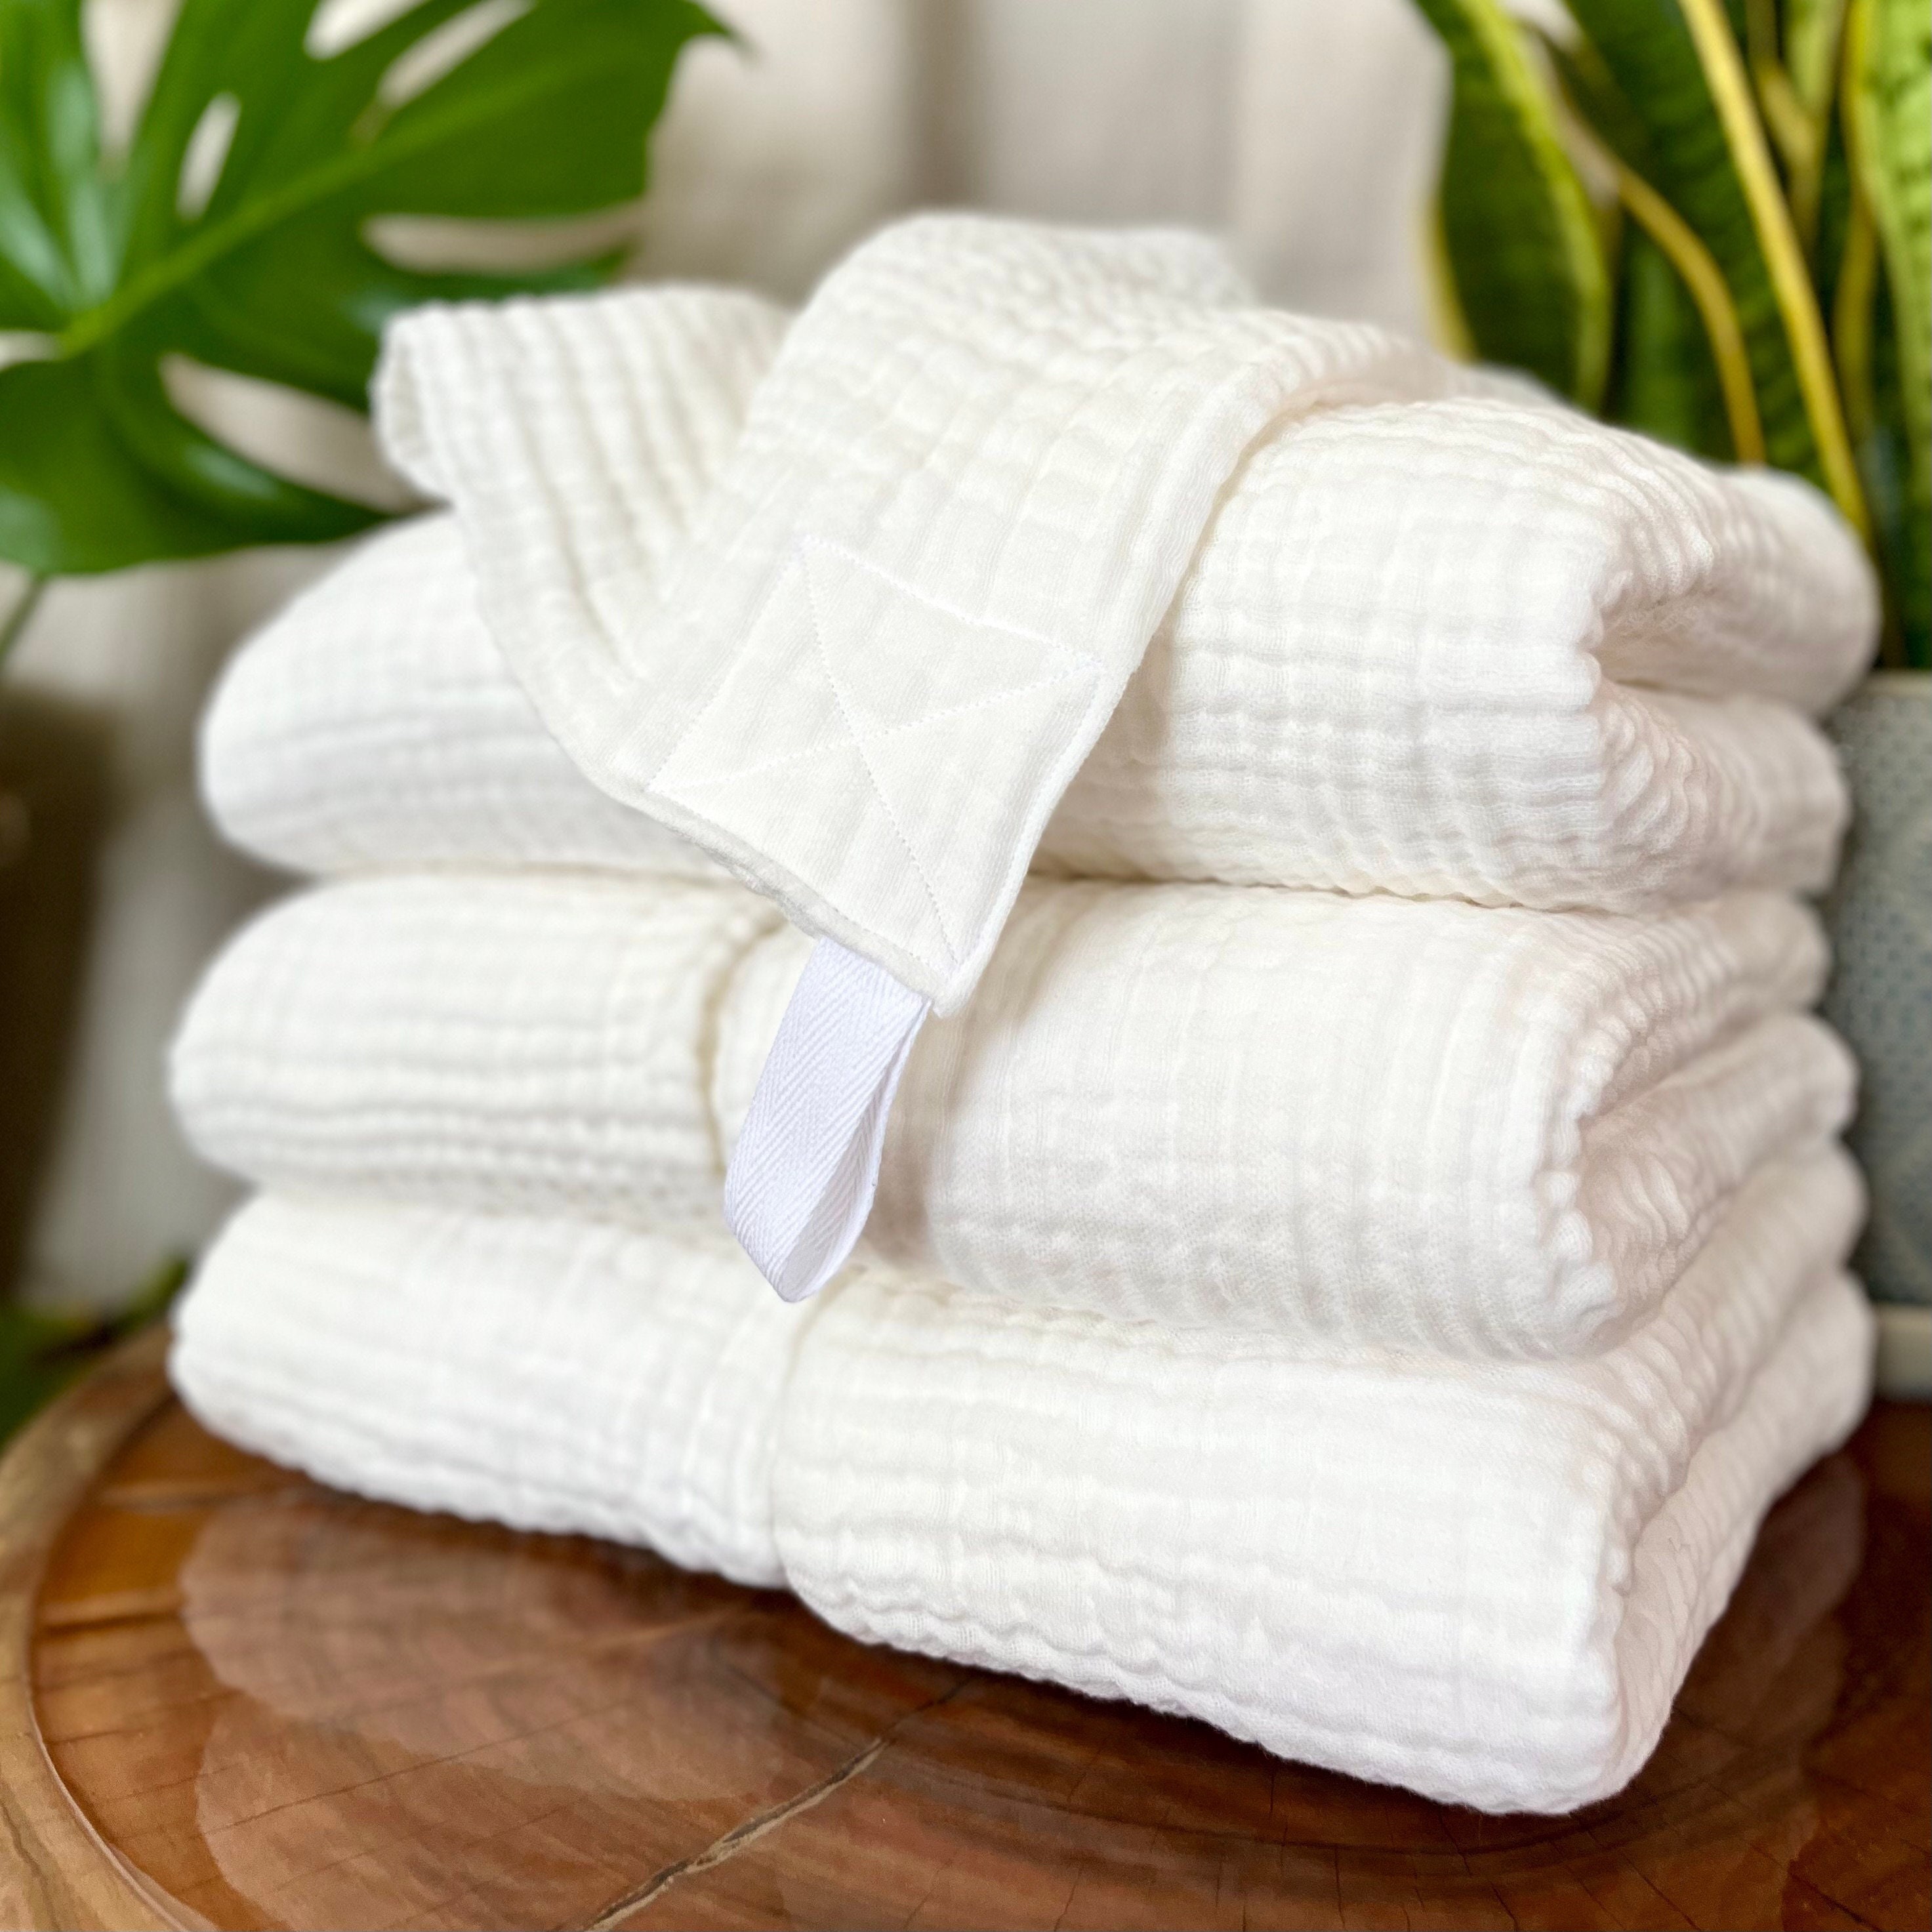 Set of 2 Medium THICK Muslin Gauze Towels 24X40 / 4 Layers of